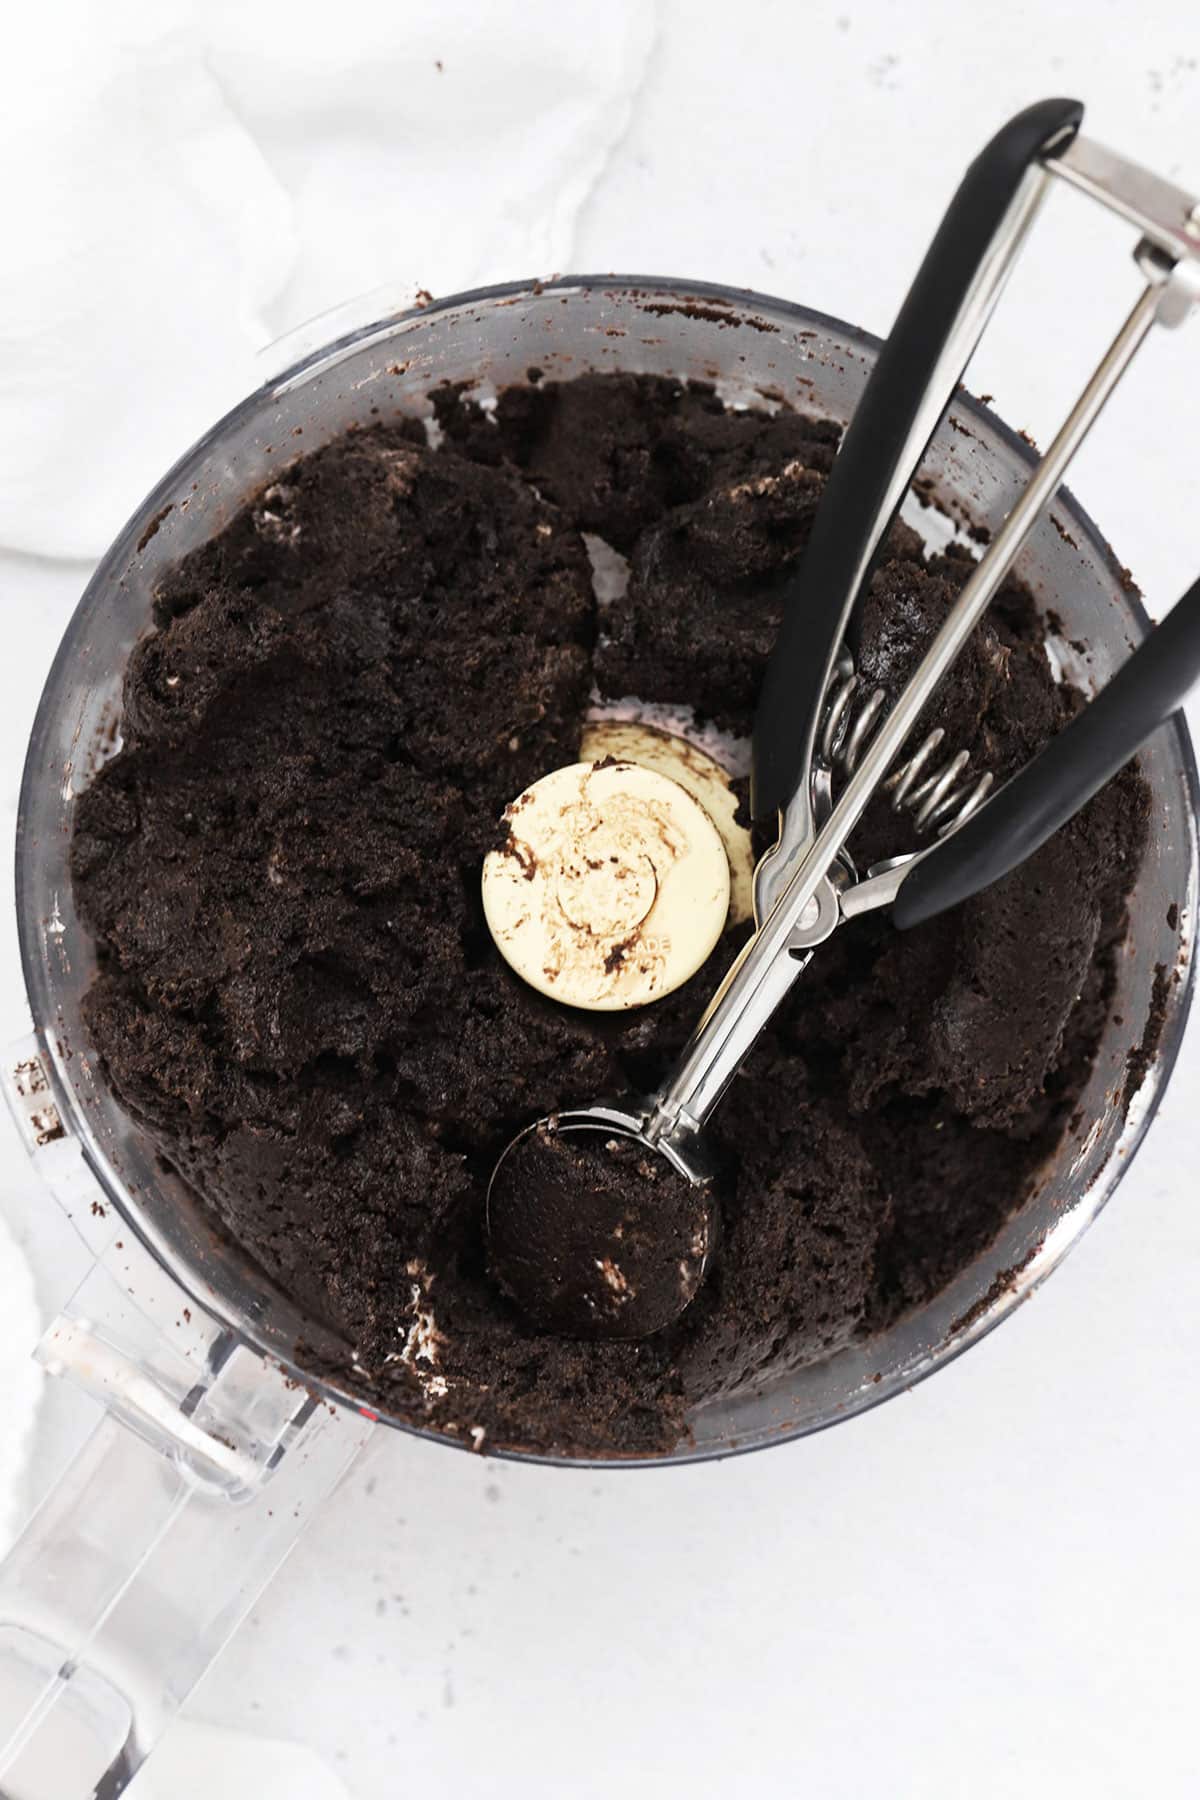 Scooping gluten-free Oreo truffles with a small cookie scoop